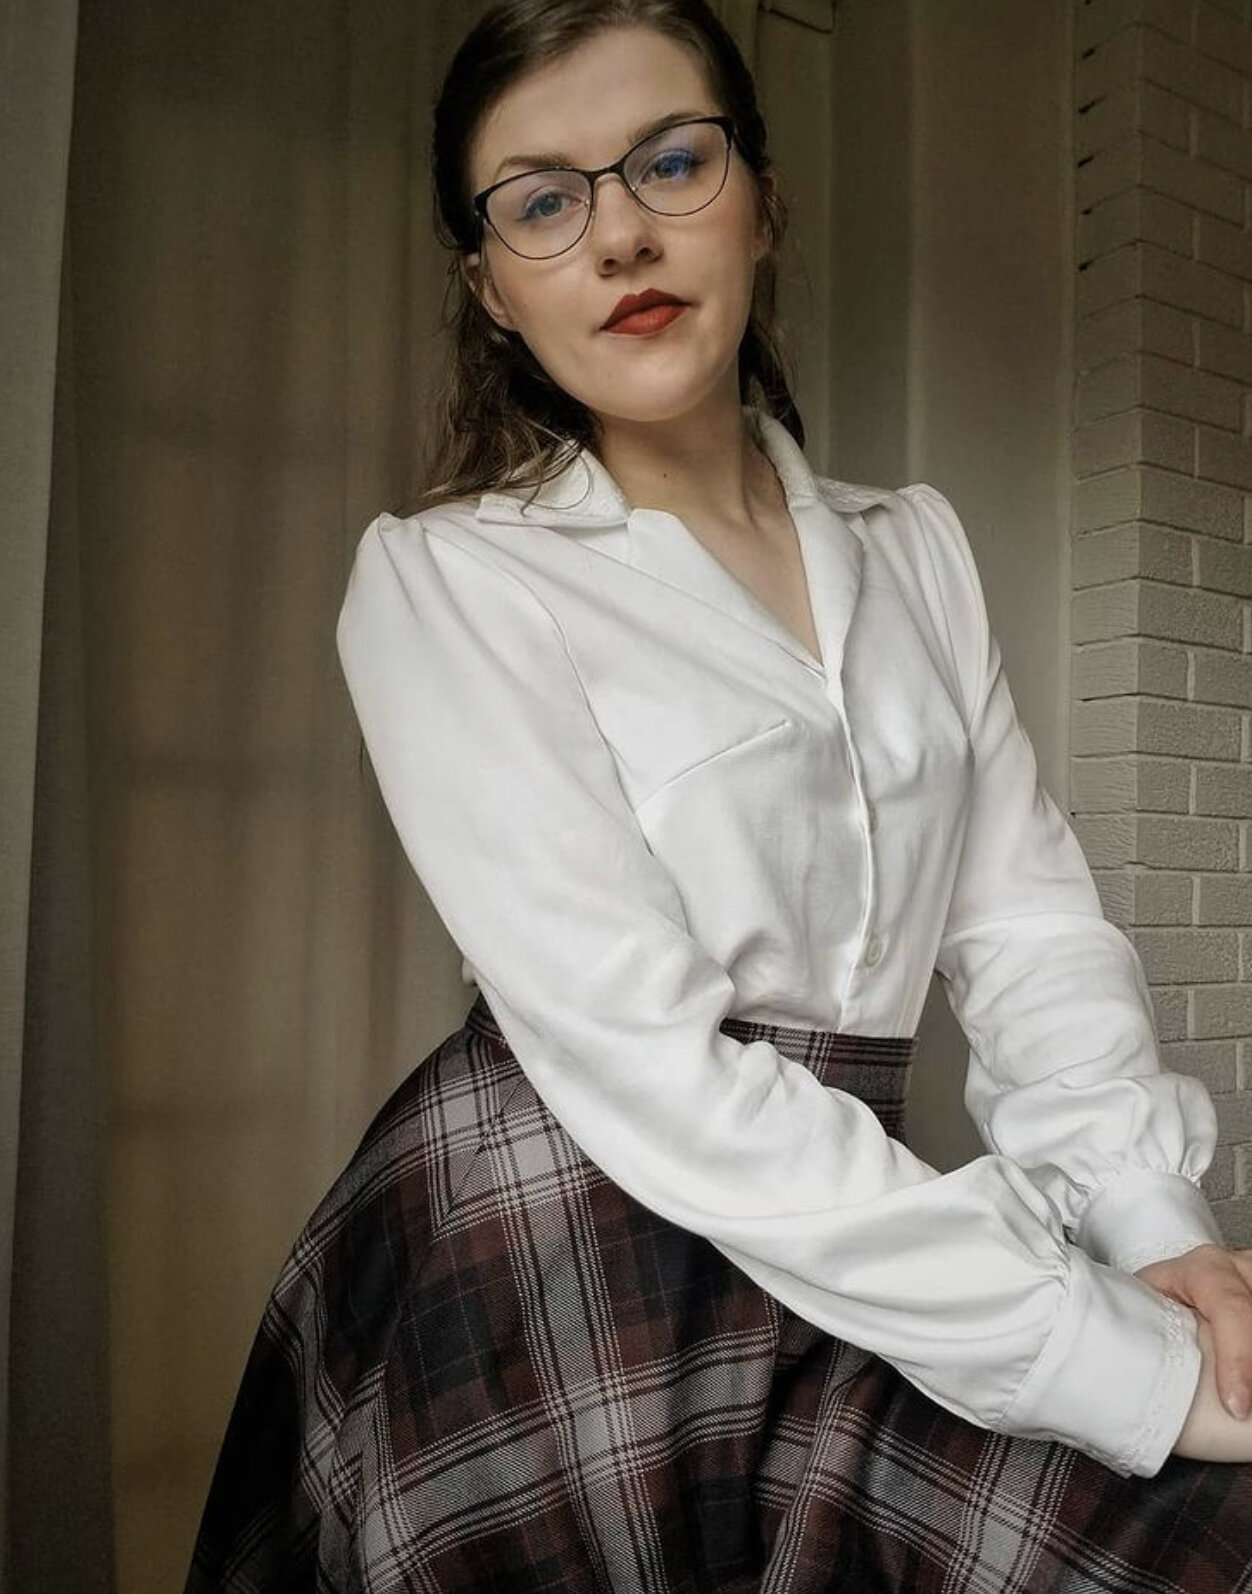 Hailey is pictured wearing her ‘Lillias’ blouse and ‘Rosie’ Lunar tartan skirt